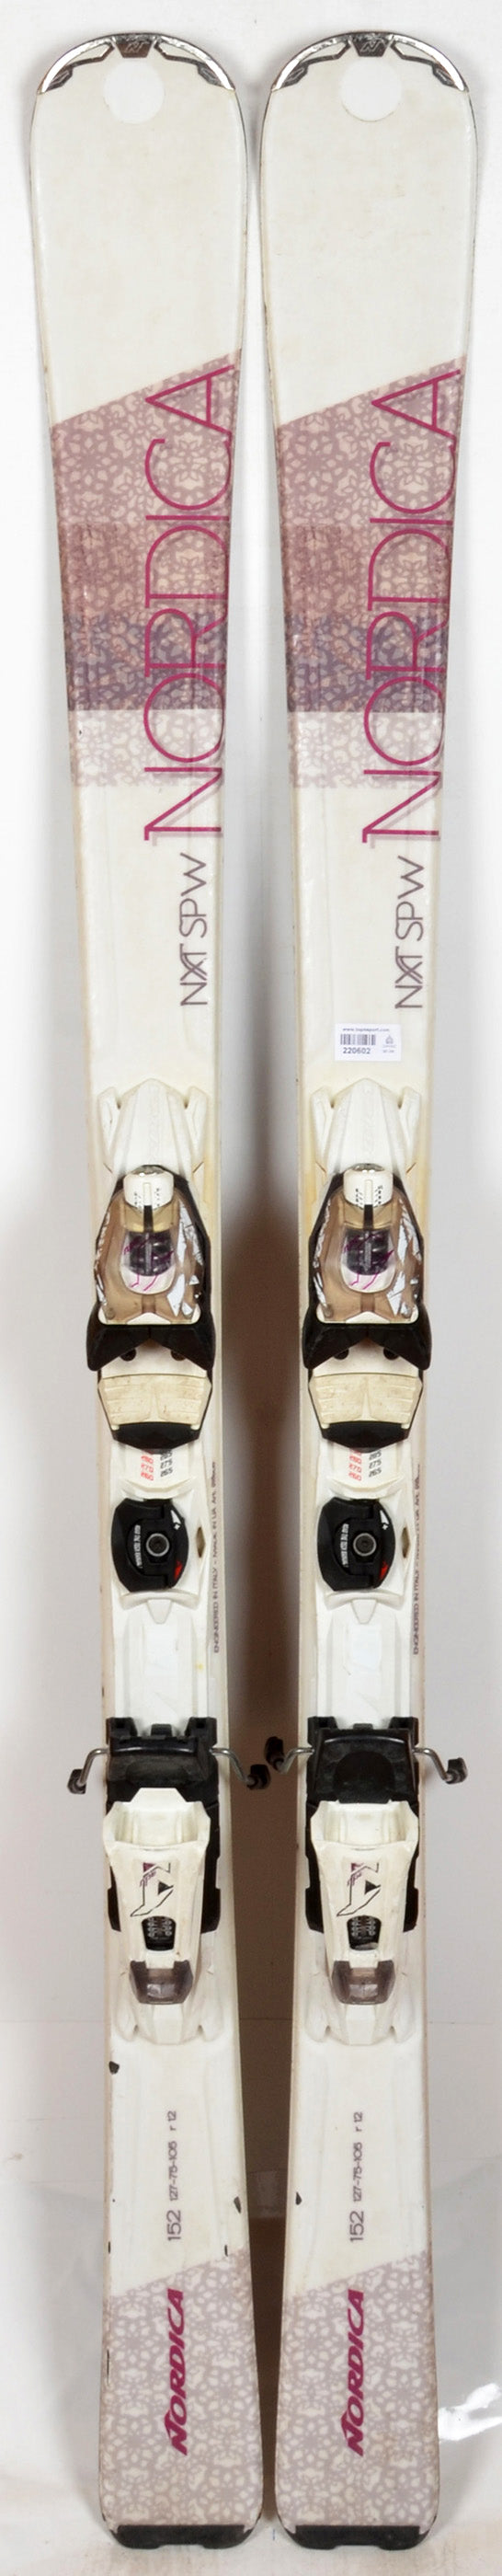 Nordica NXT SPW - skis d'occasion Femme